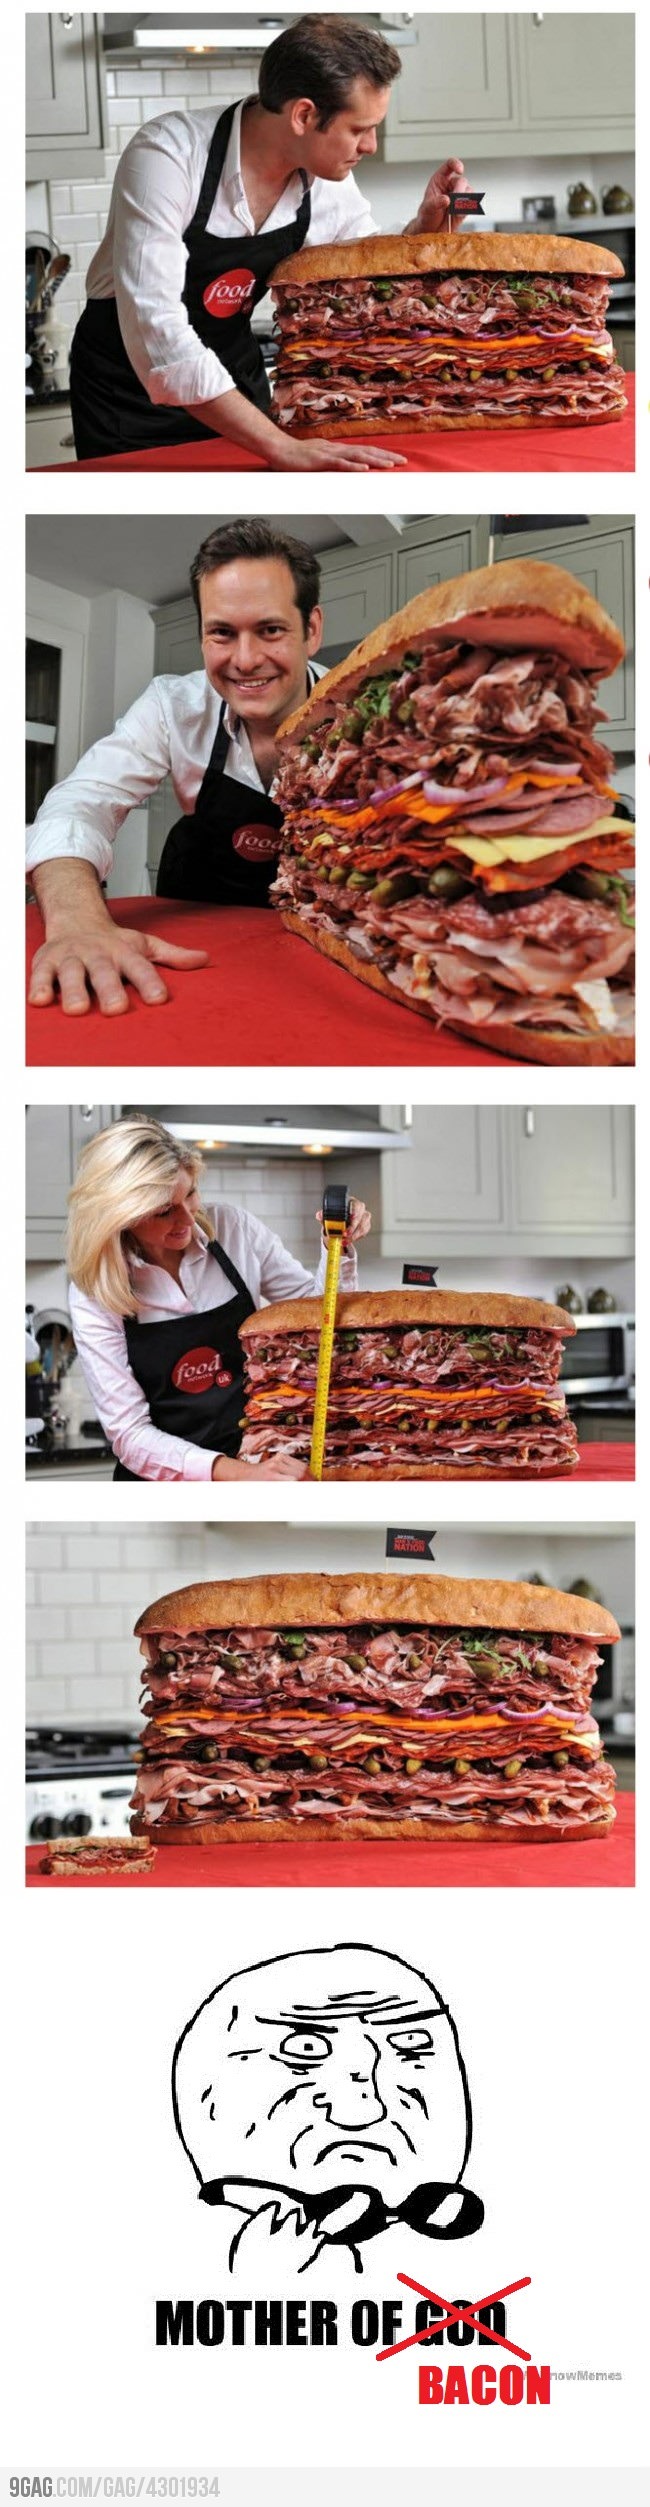 MOTHER OF BACON - meme